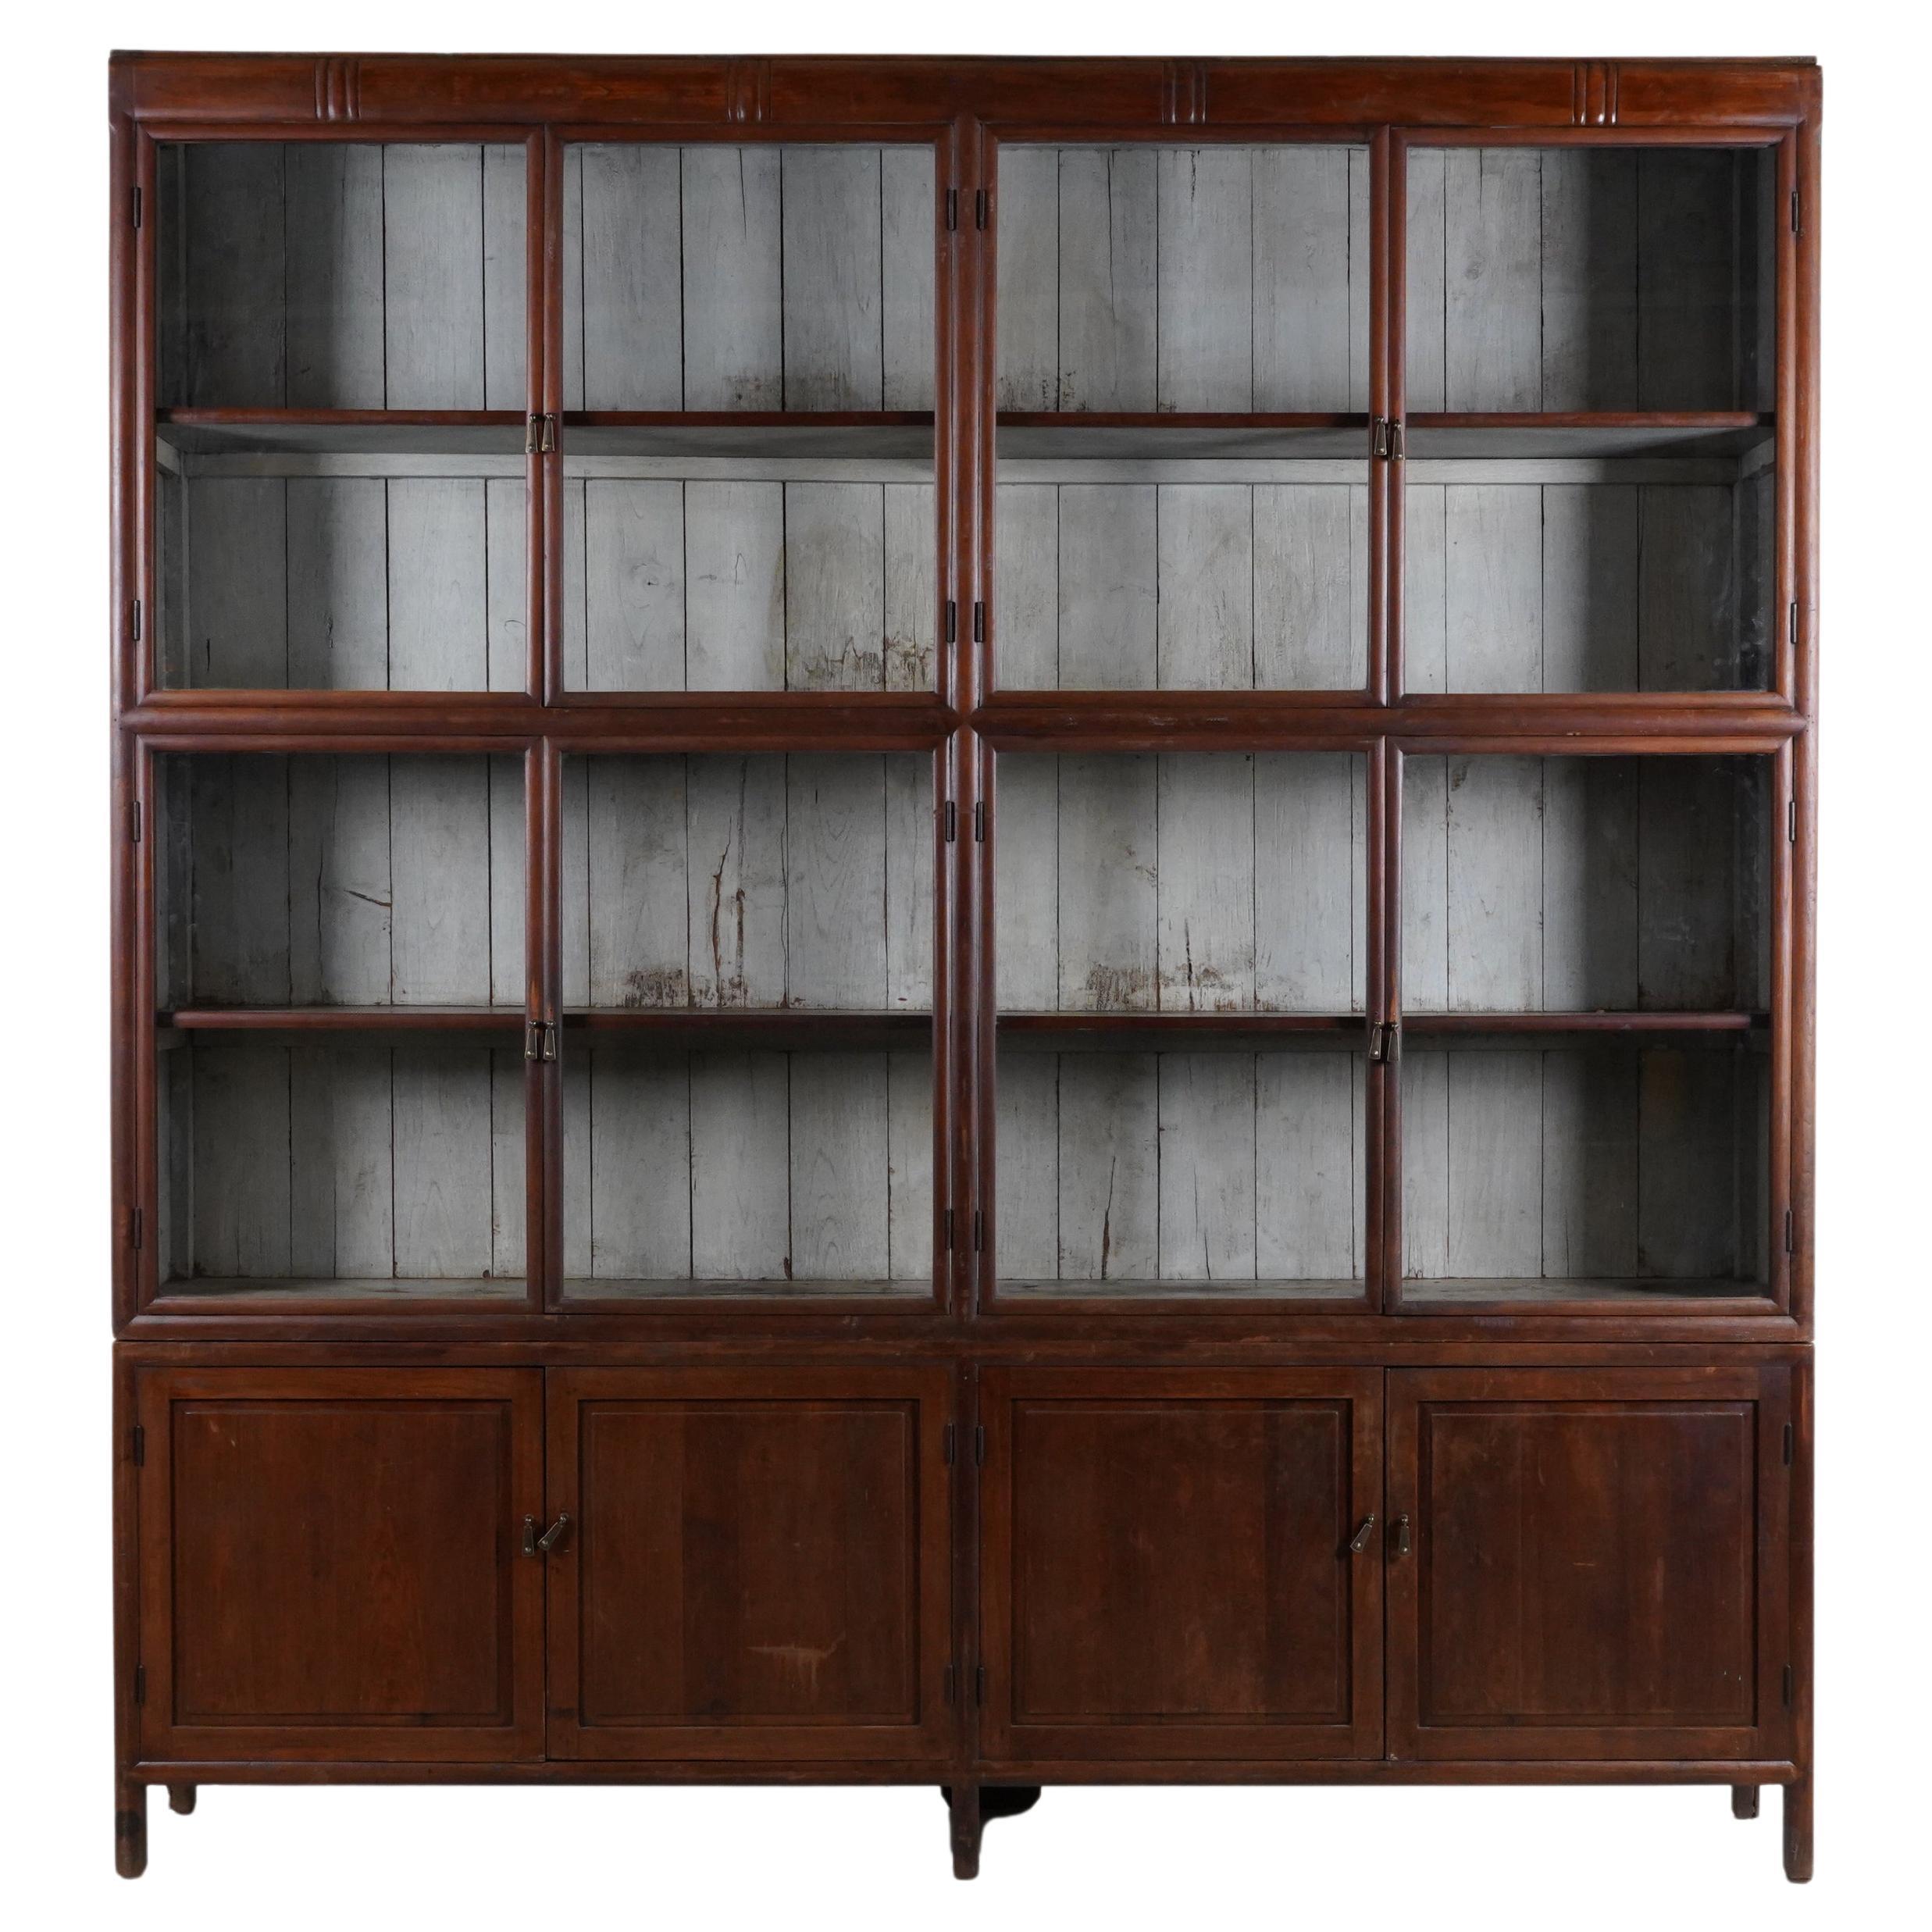 A British Colonial Art Deco Teak Bookcase with Lower Storage 